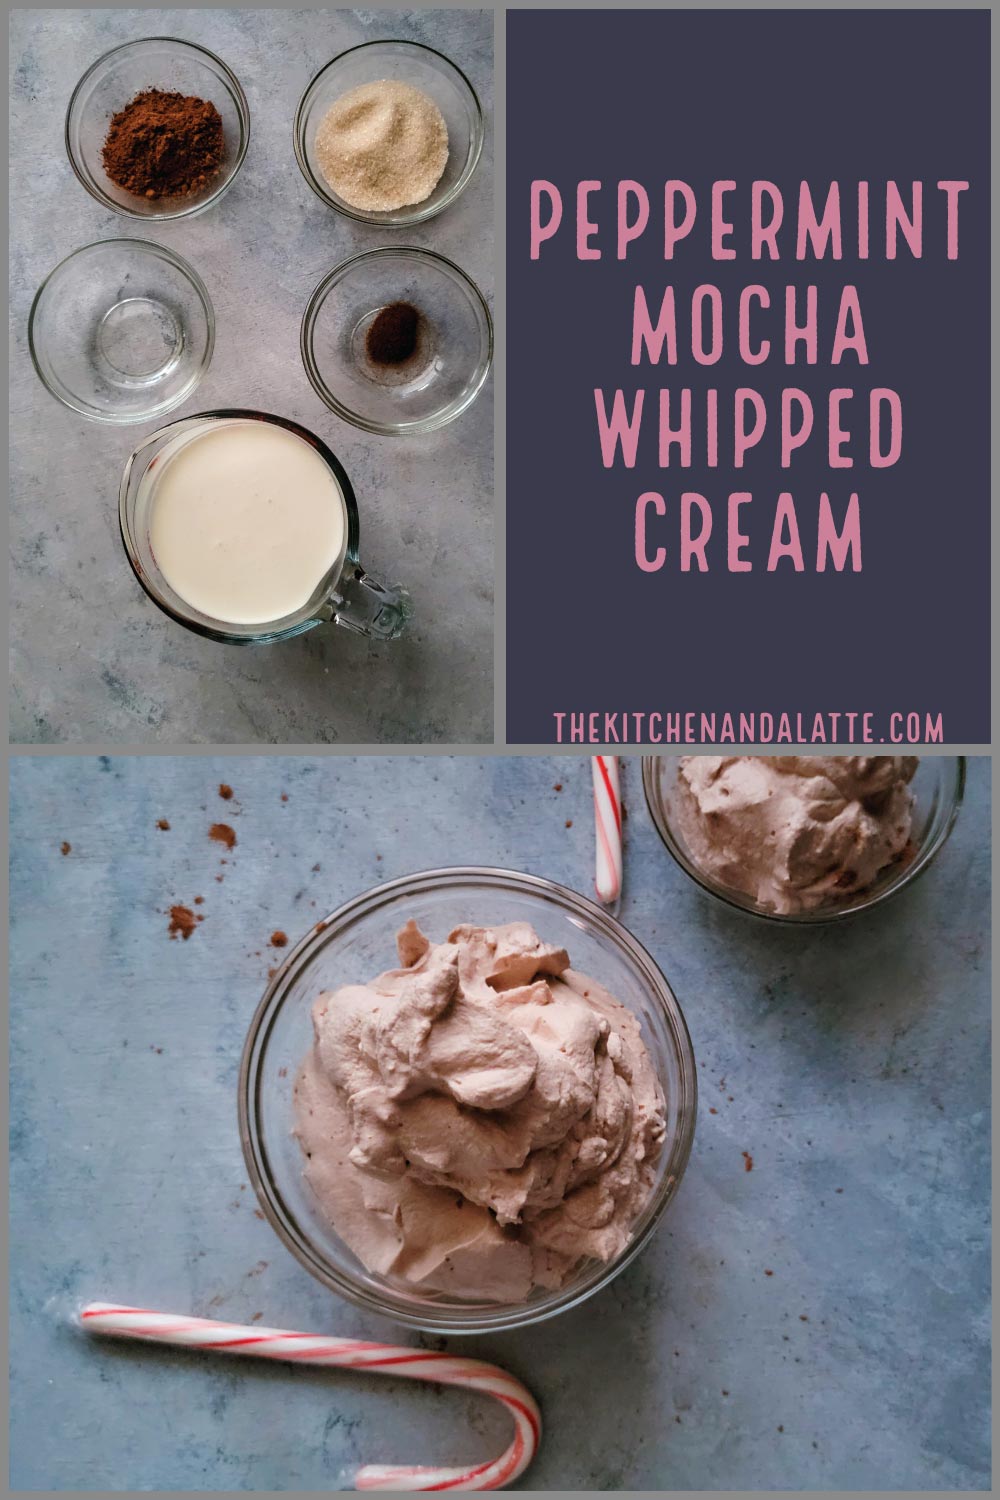 Peppermint mocha whipped cream Pinterest graphic. Whipped cream in 2 bowls with candy canes as a decoration and ingredients prepped.